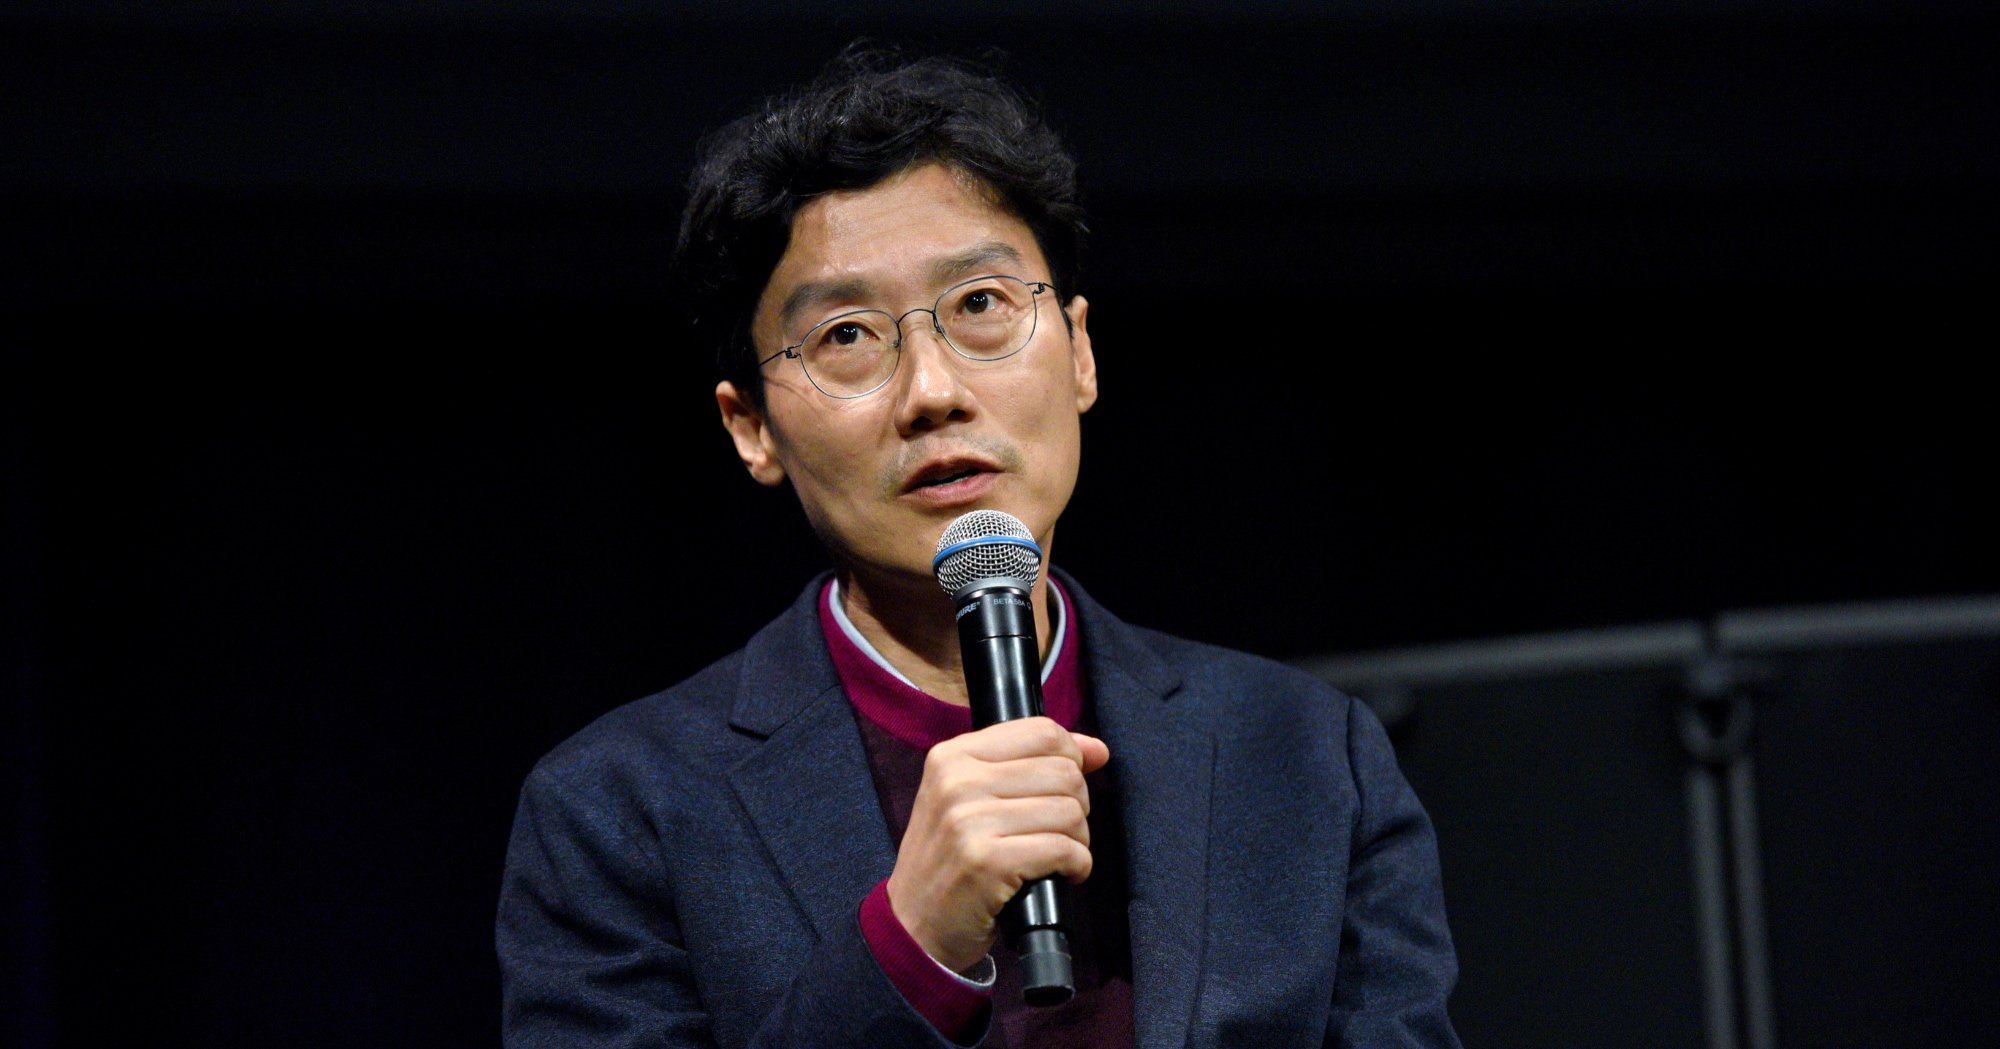 'Squid Game' director Hwang Dong-hyuk in relation to 'Bridgerton' comment holding microphone.